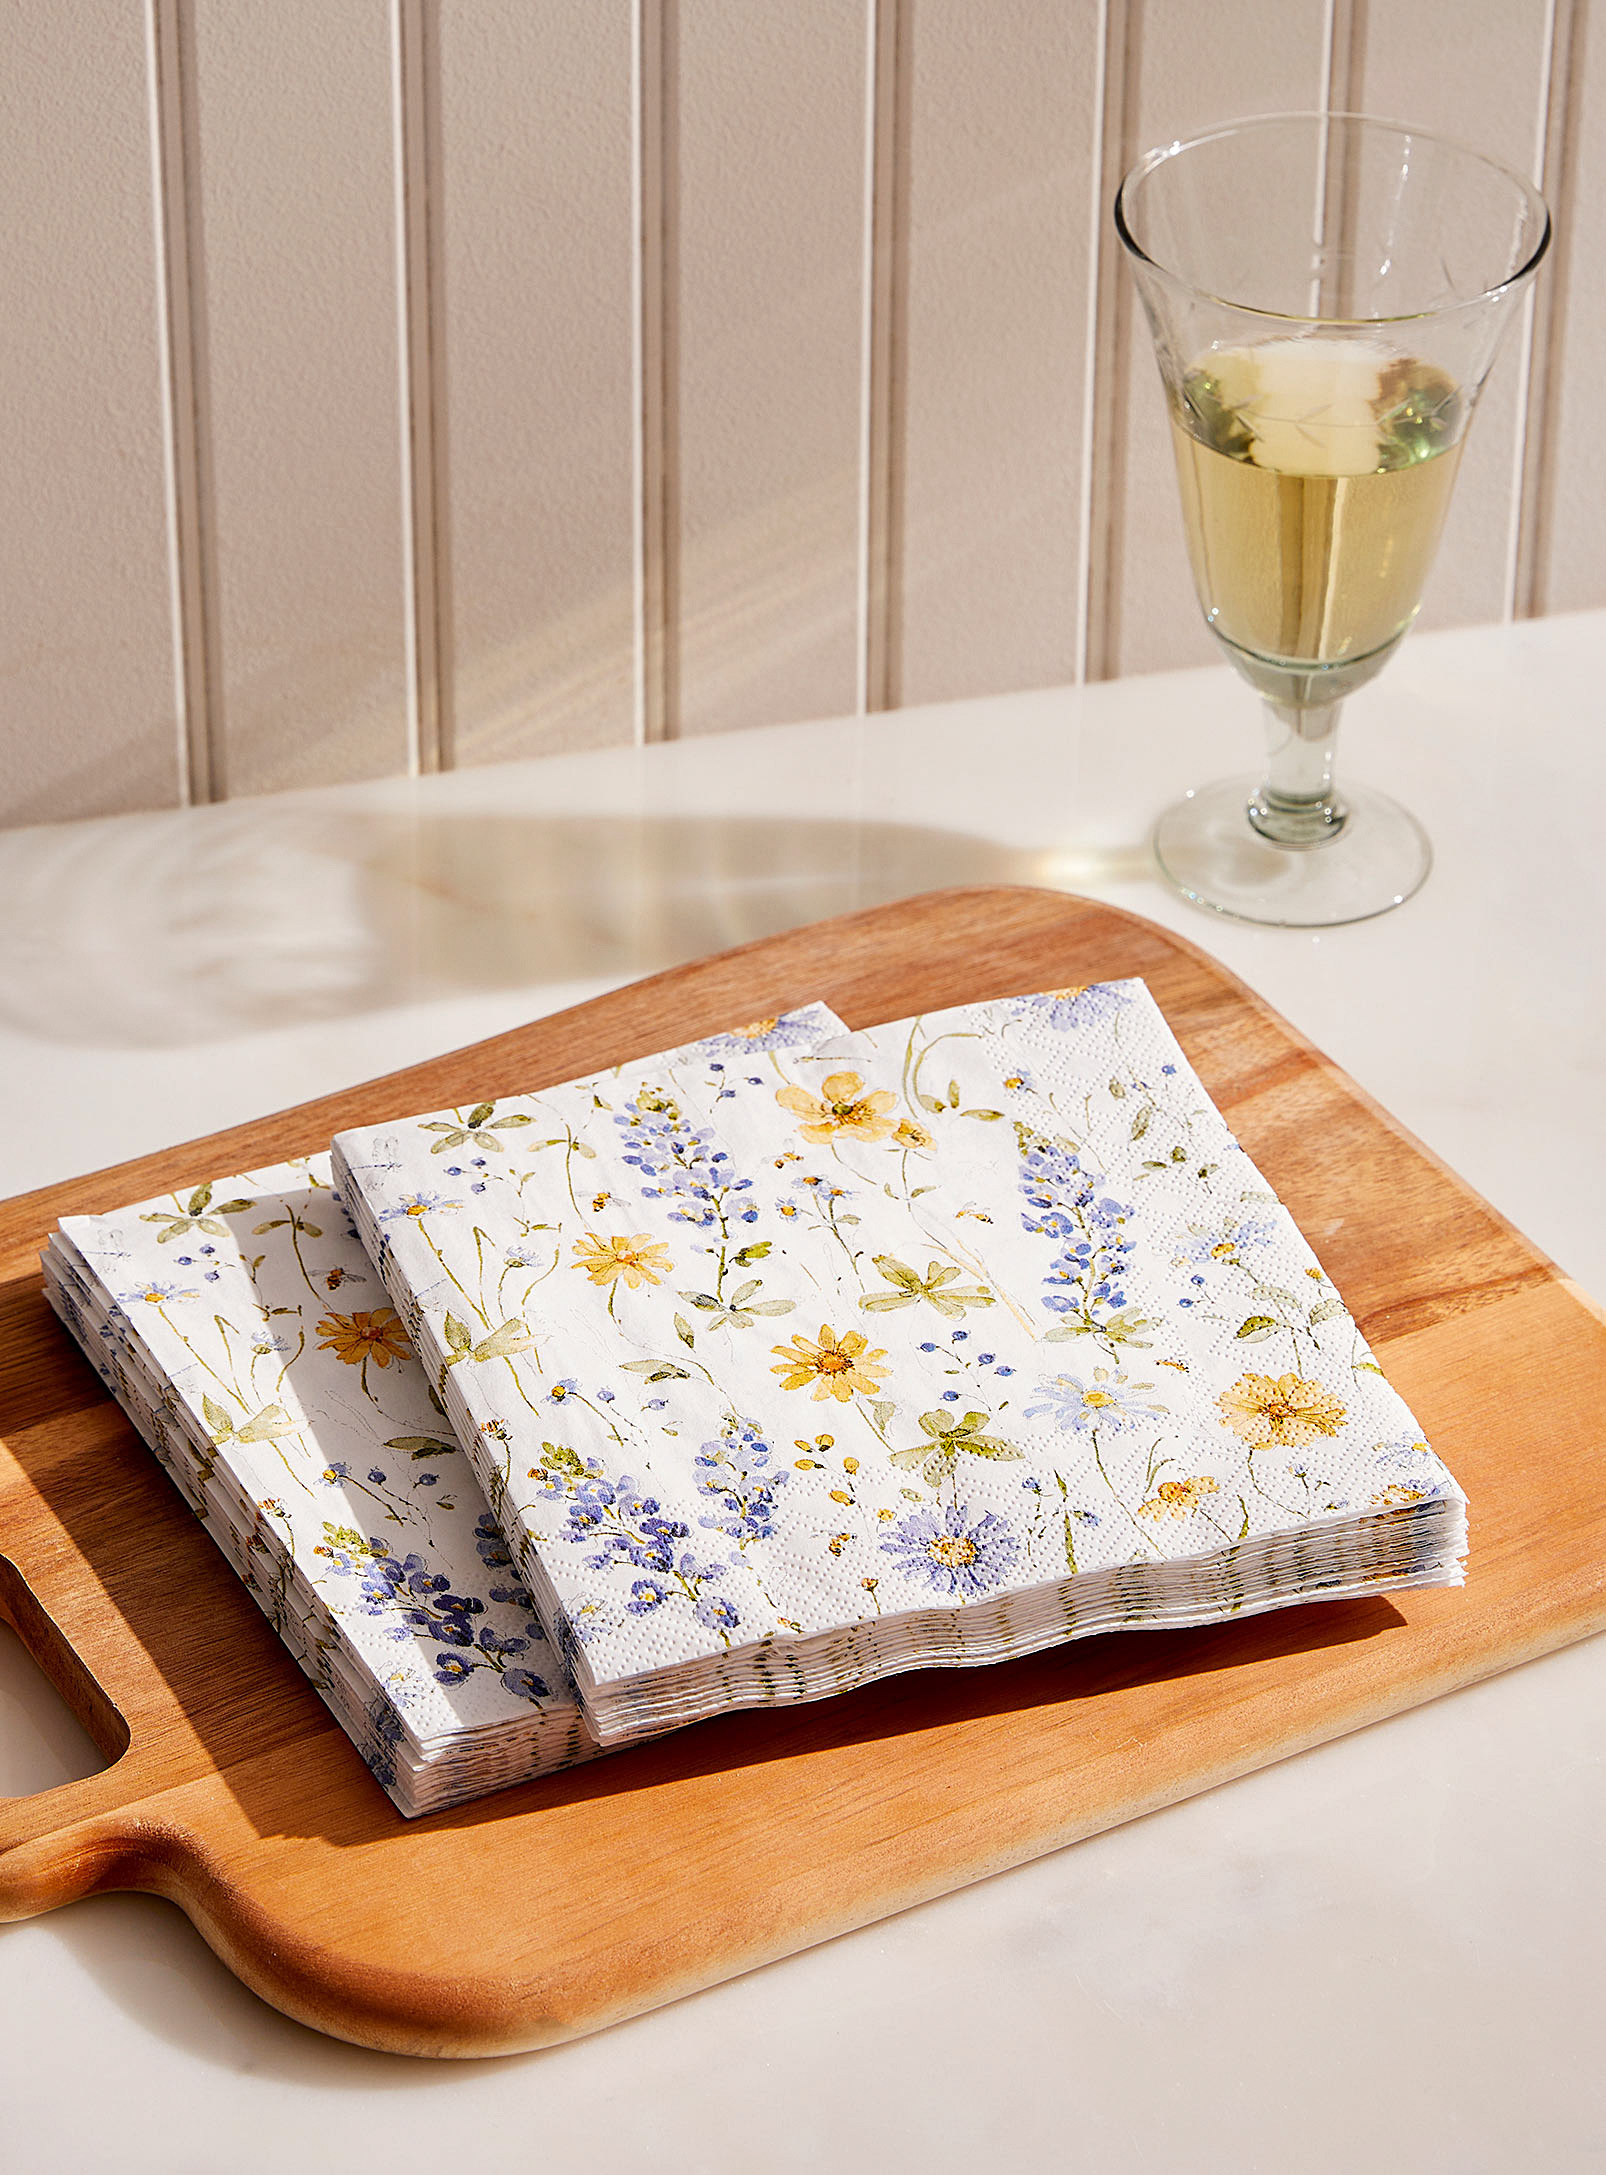 Simons Maison Wildflowers Paper Napkins 16.5 X 16.5 Cm. Pack Of 20. In Patterned White